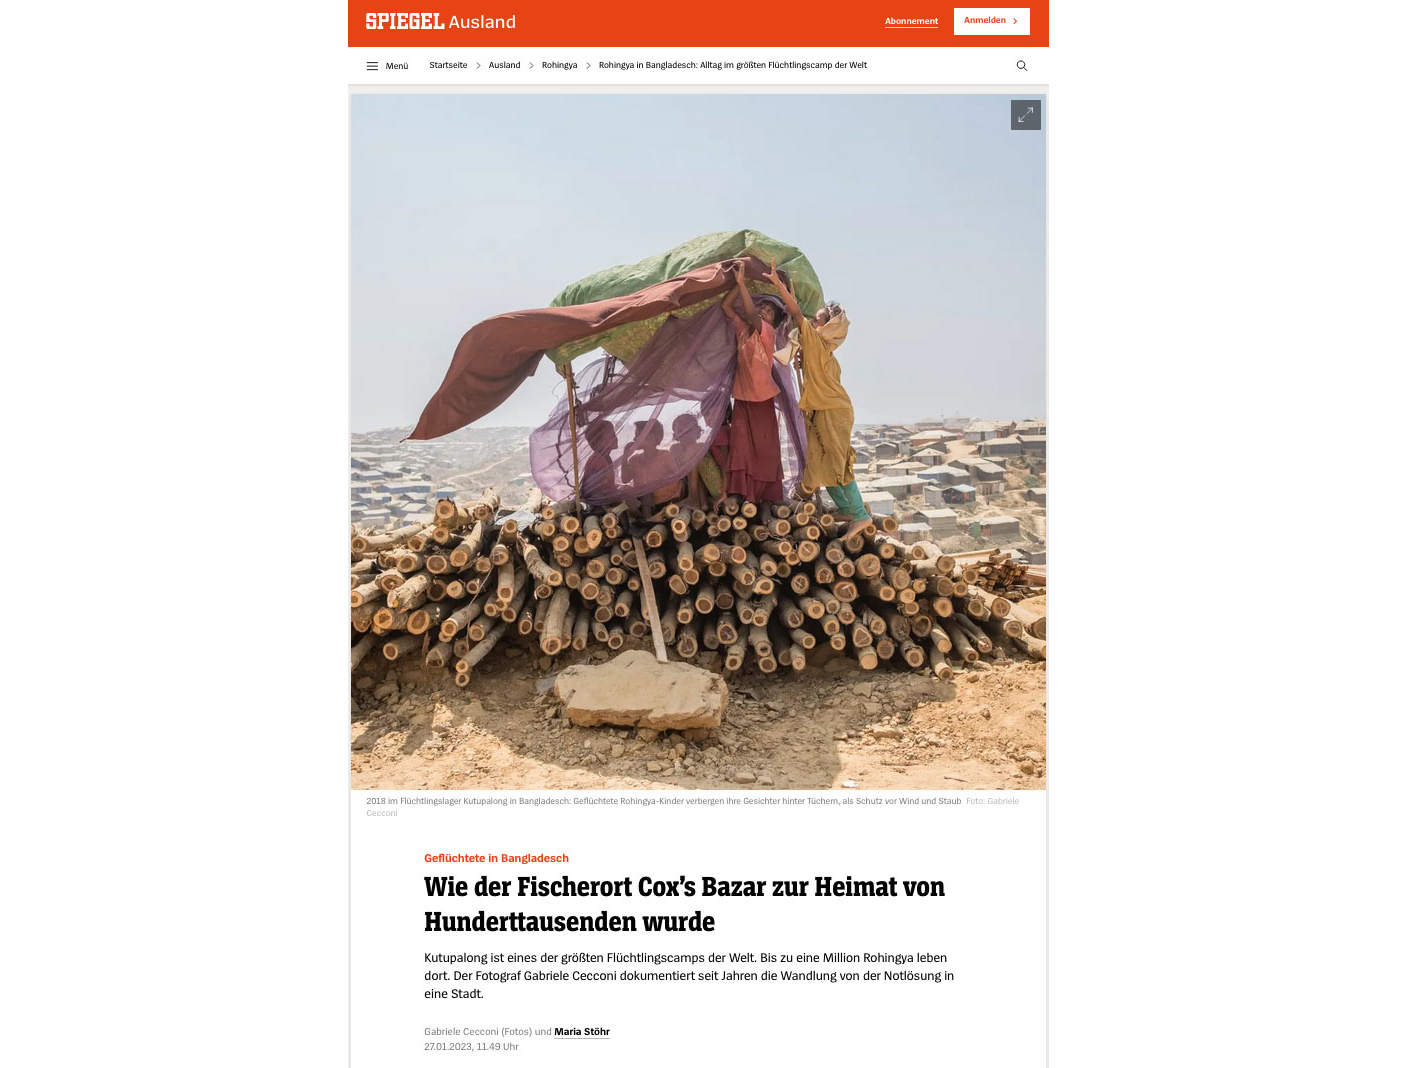 “The Wretched and the Earth” in Der Spiegel online